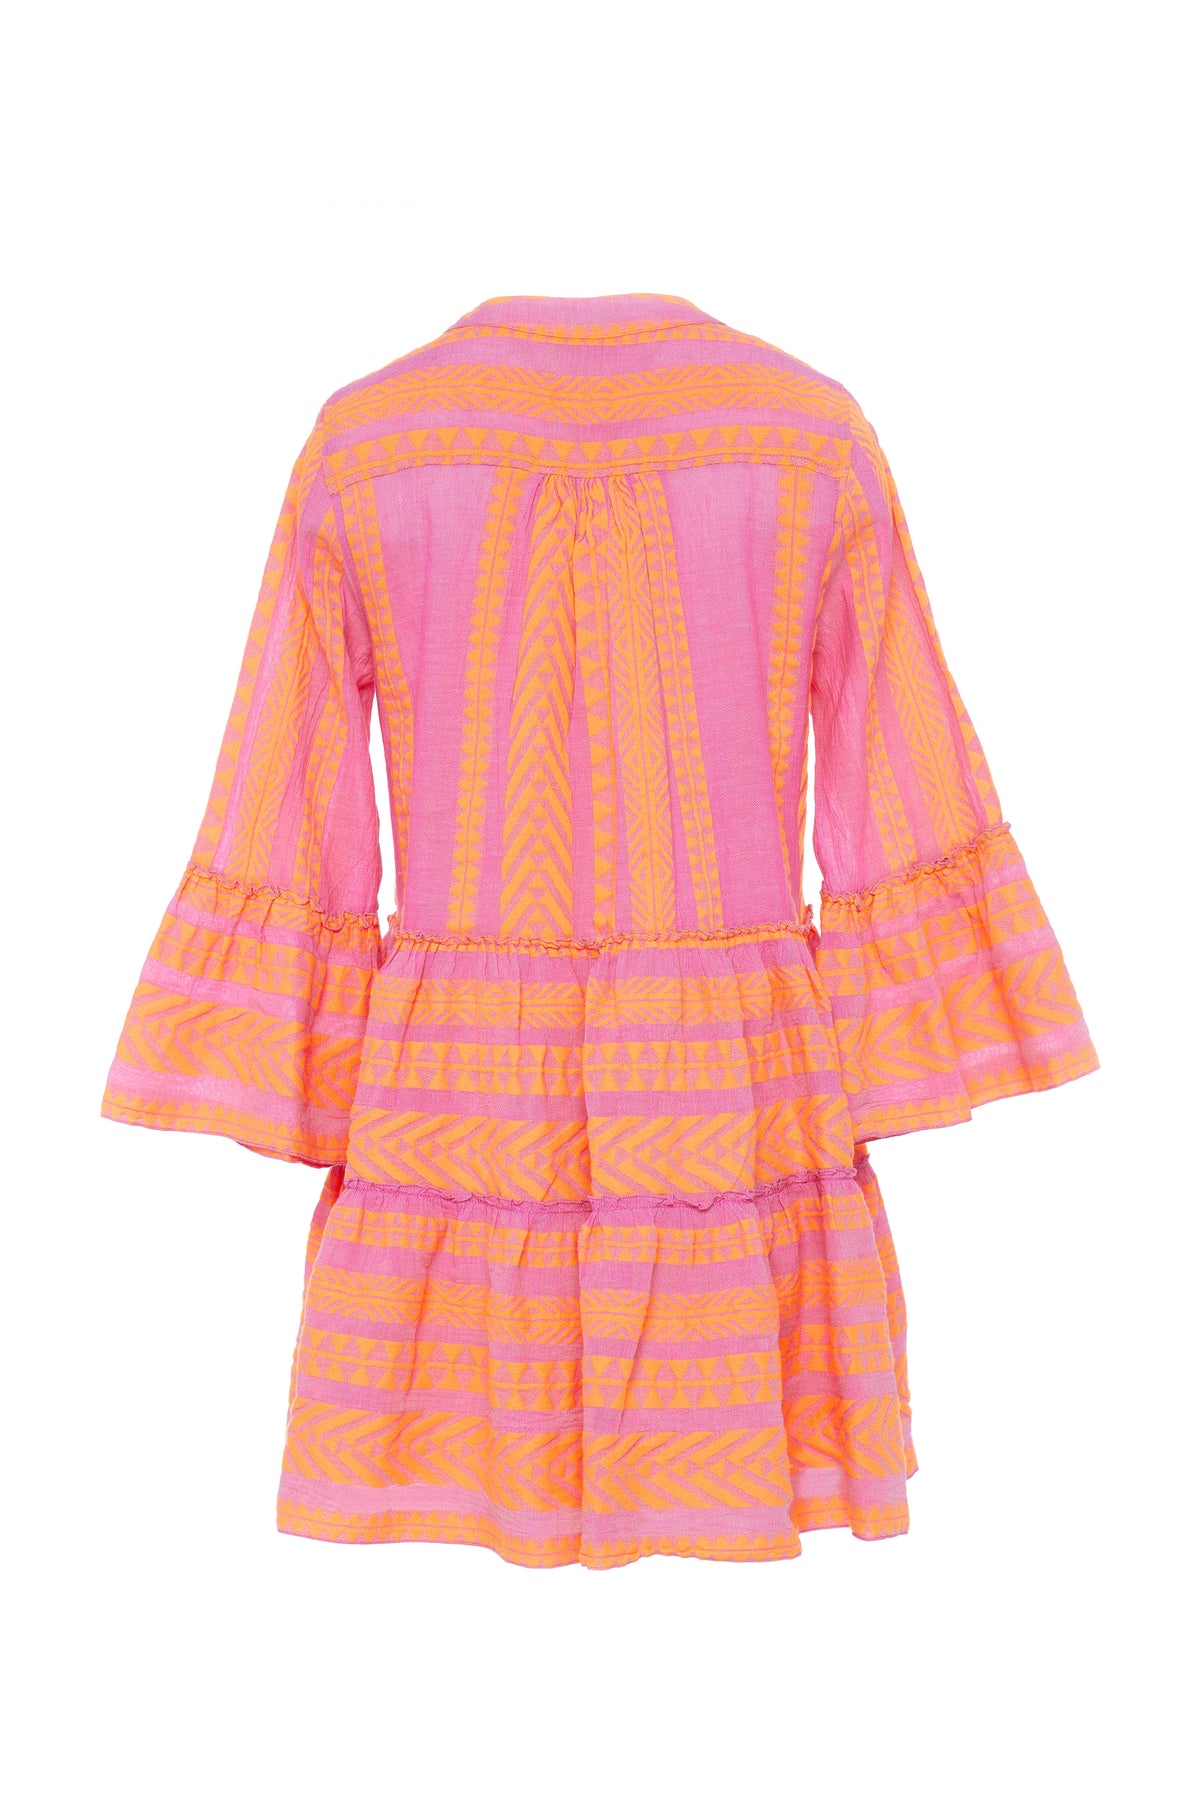 Fuscia pink notch neck above the knee dress with long fluted sleeves and tripe tiered A line skirt with neon orange embroidery throughout